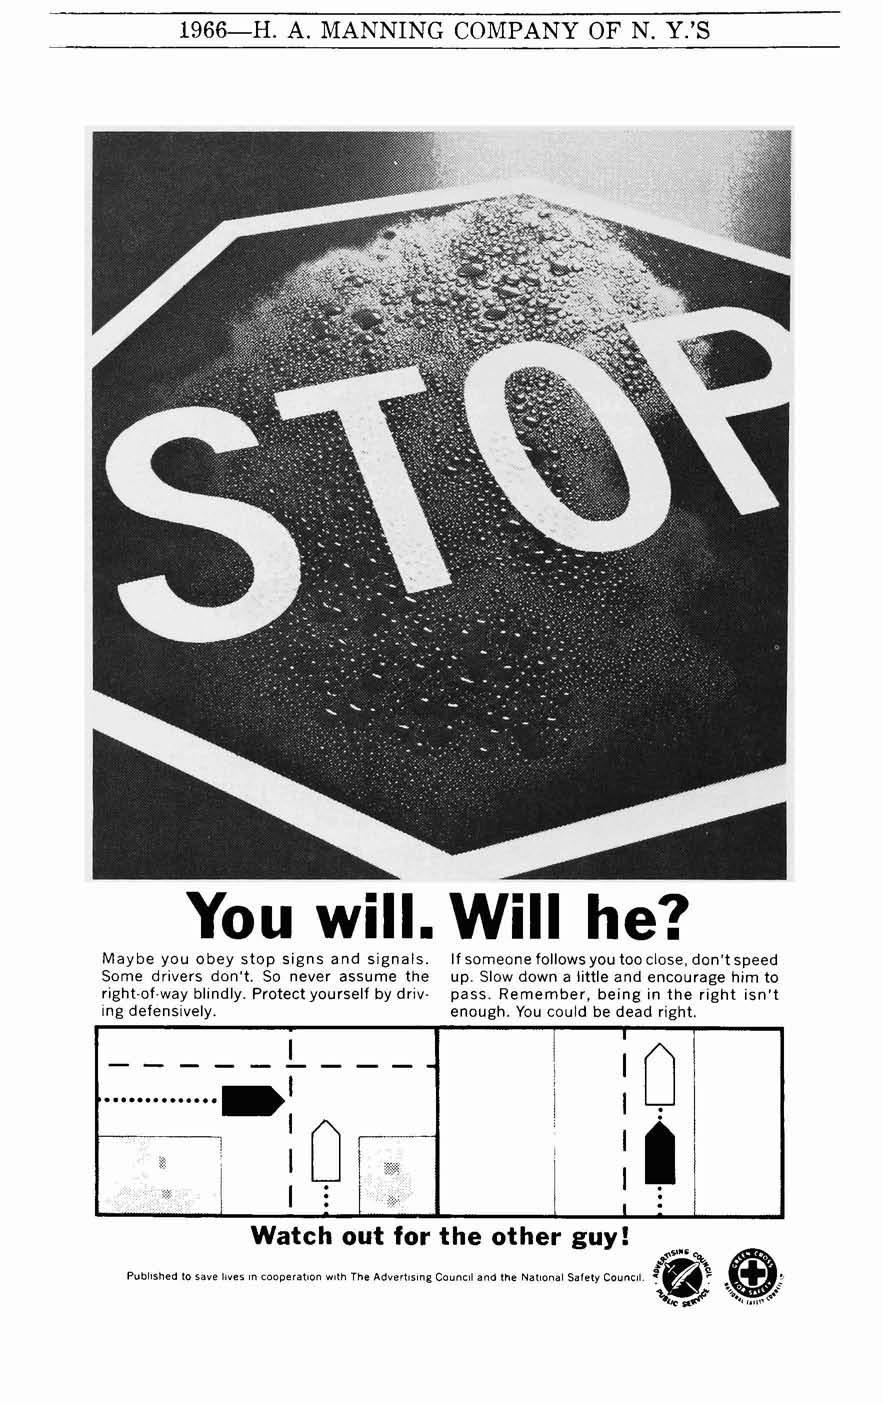 1966-H. A. MANNING COMPANY OF N. Y'S You will. Will he? Maybe you obey stop signs and signals. Some drivers don't. So never assume the right-of-way..._1 blindly.